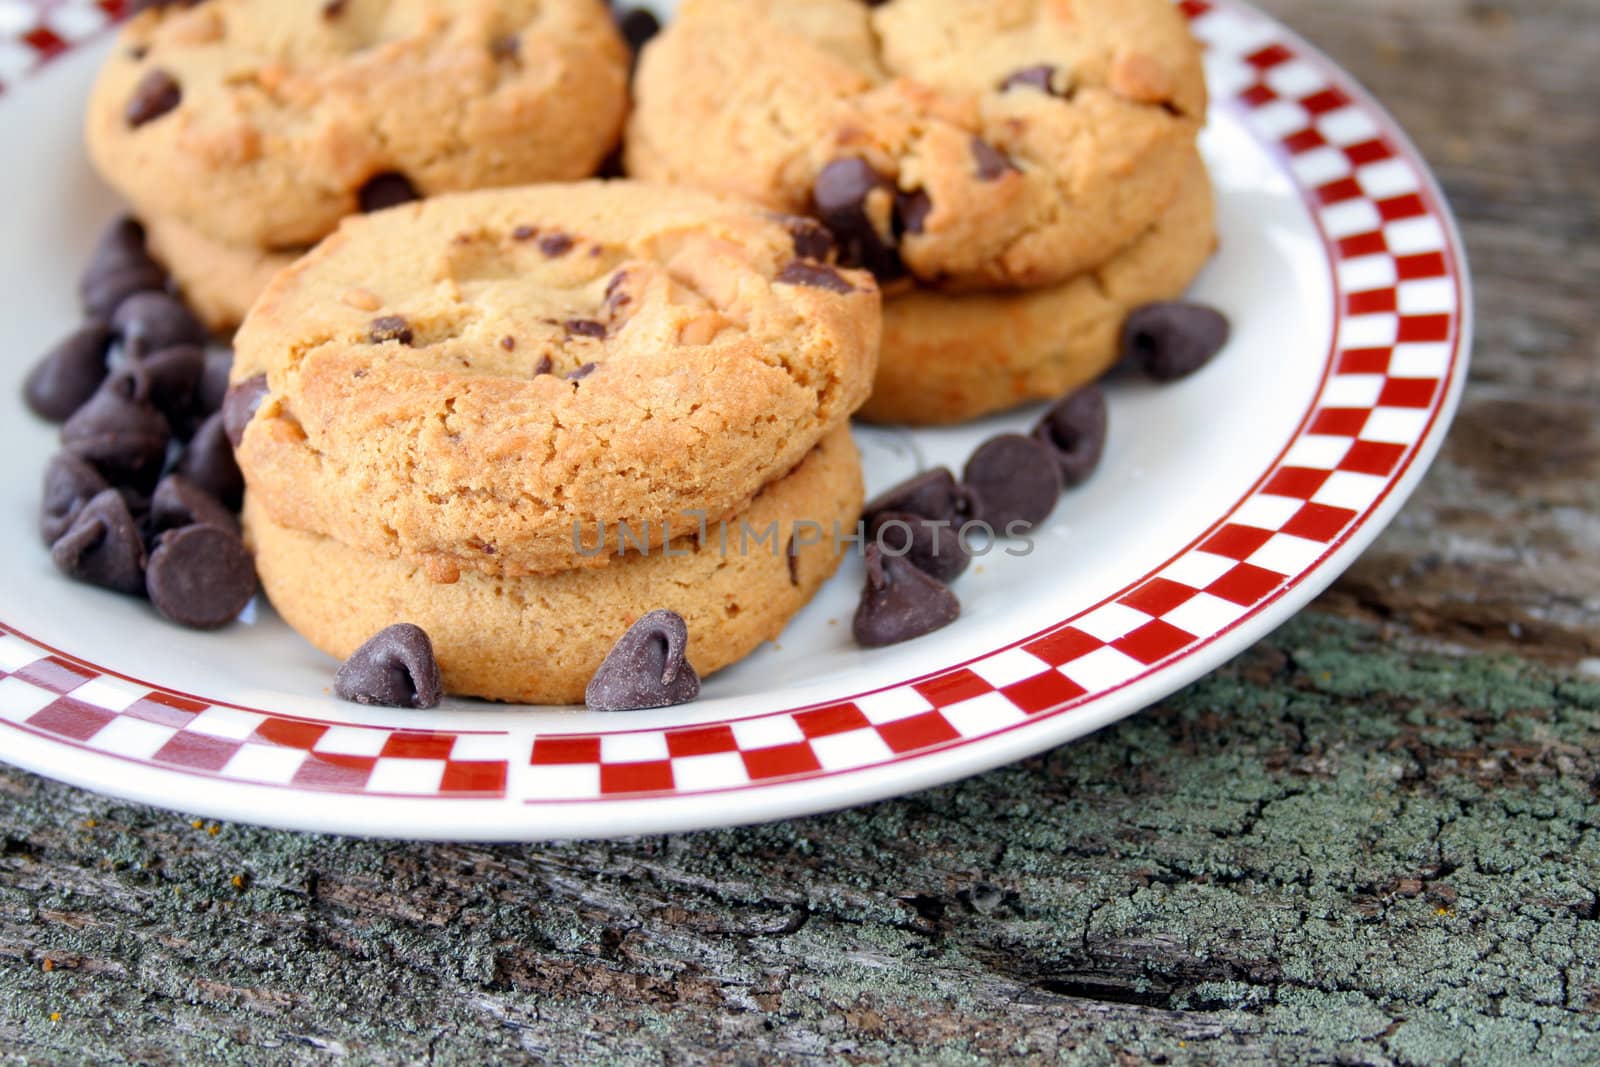 Chocolate chip cookies on a plate with chocolate chips laying around the cookies.